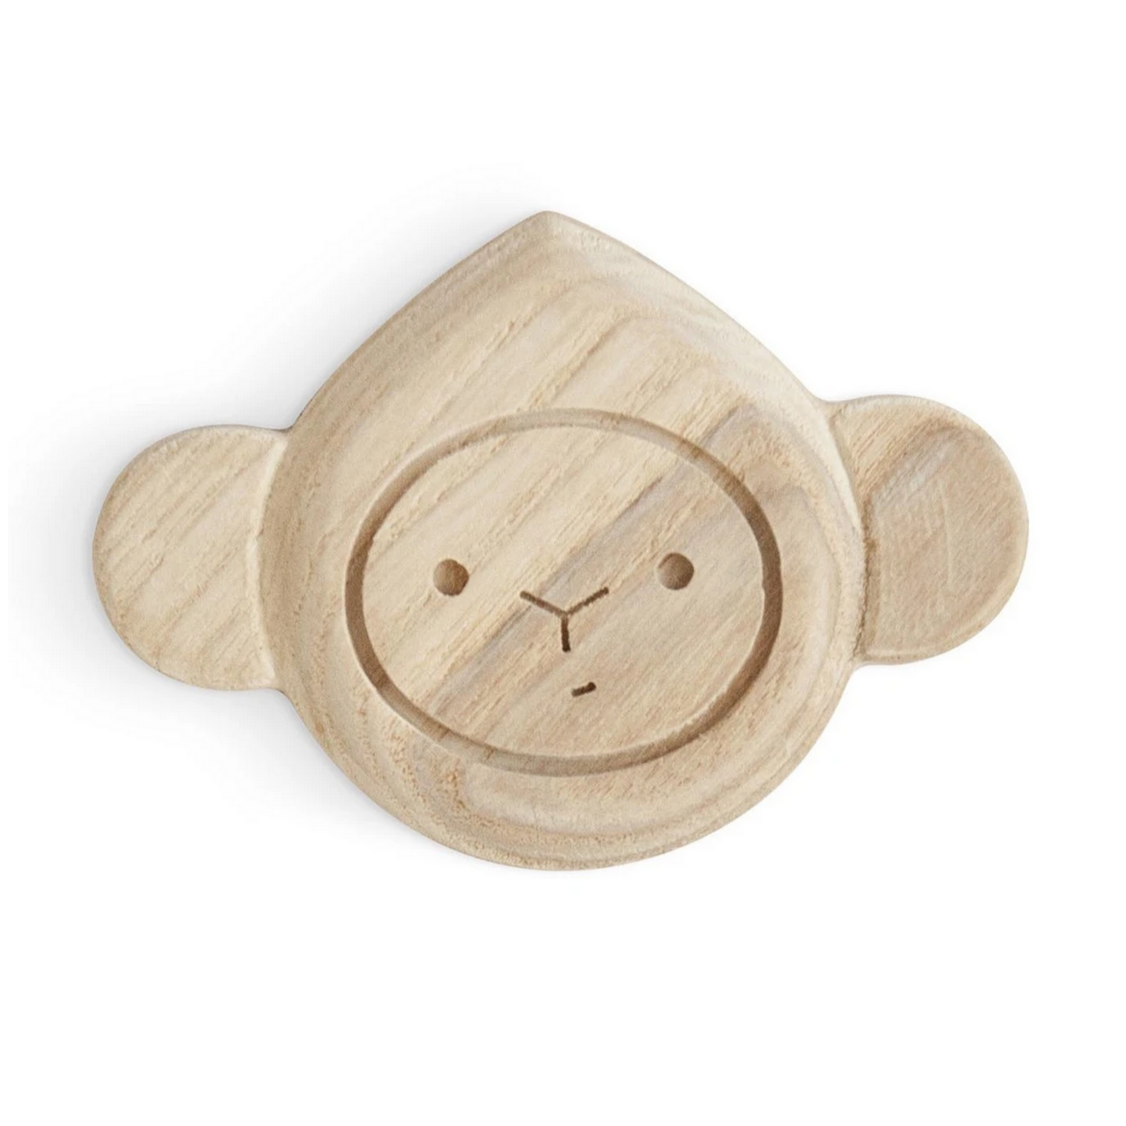 Wooden Teether "Monkey" for 10mo+